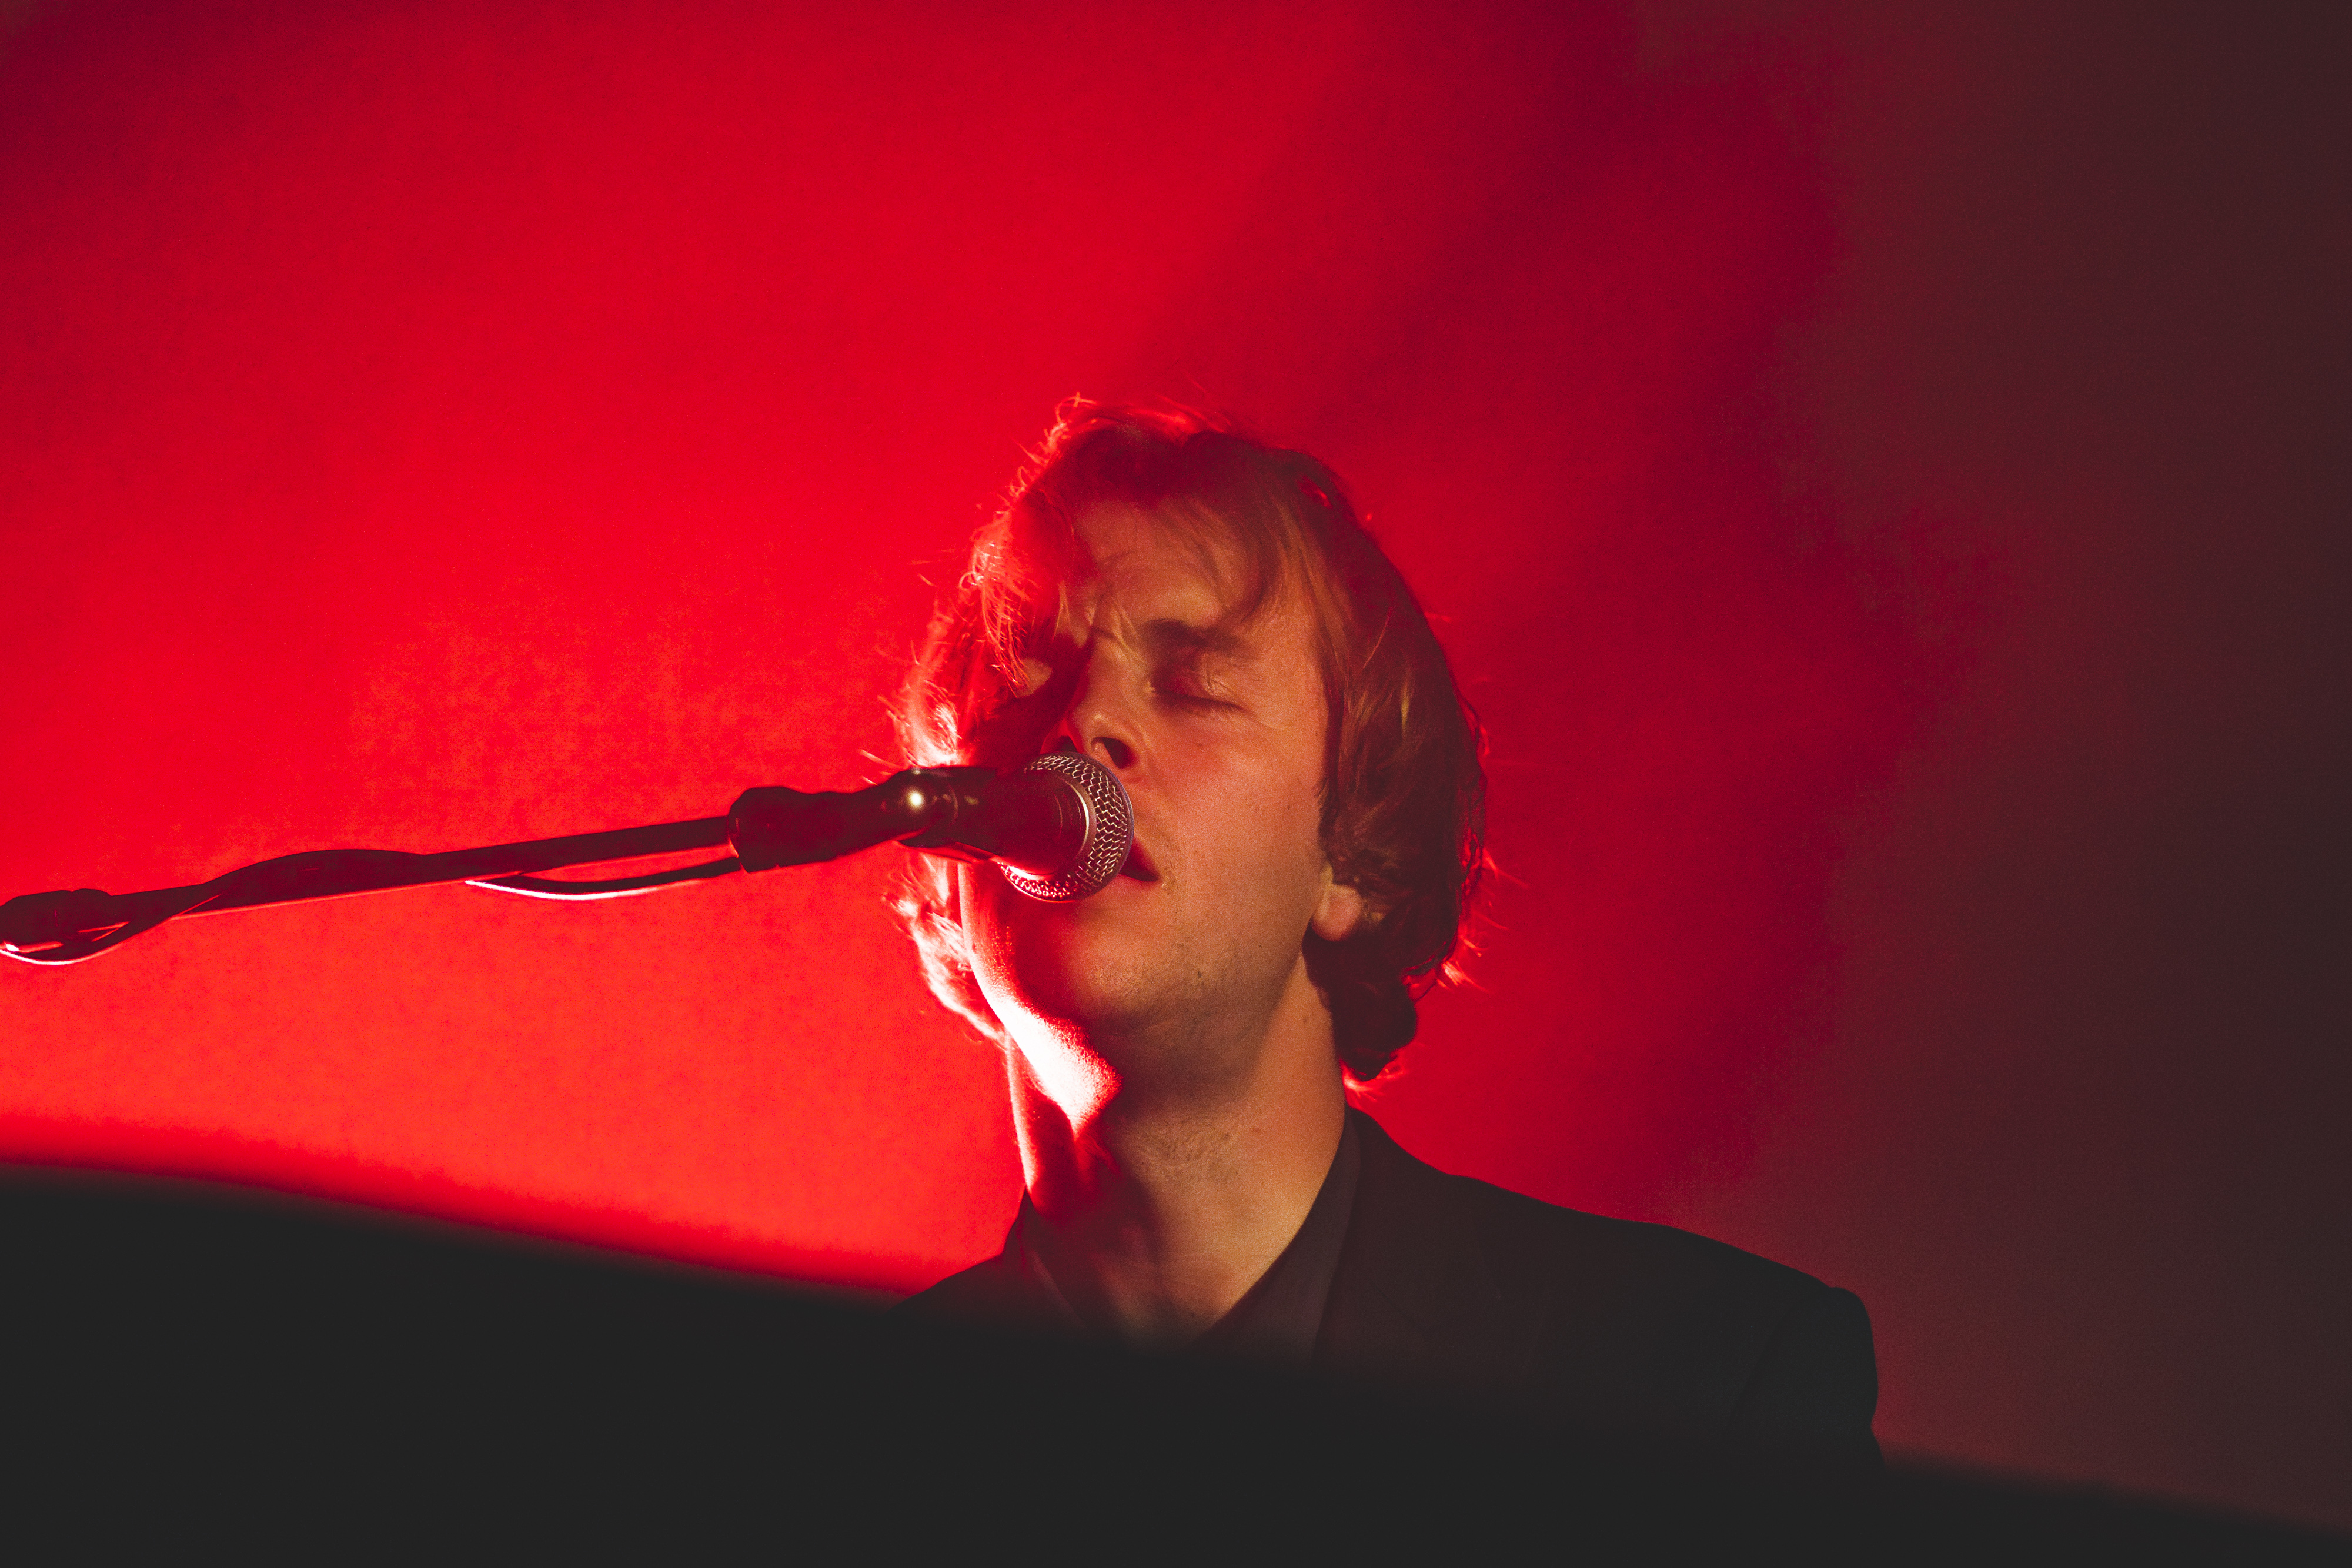 A person sings passionately into a microphone on stage, with a red light glowing in the background